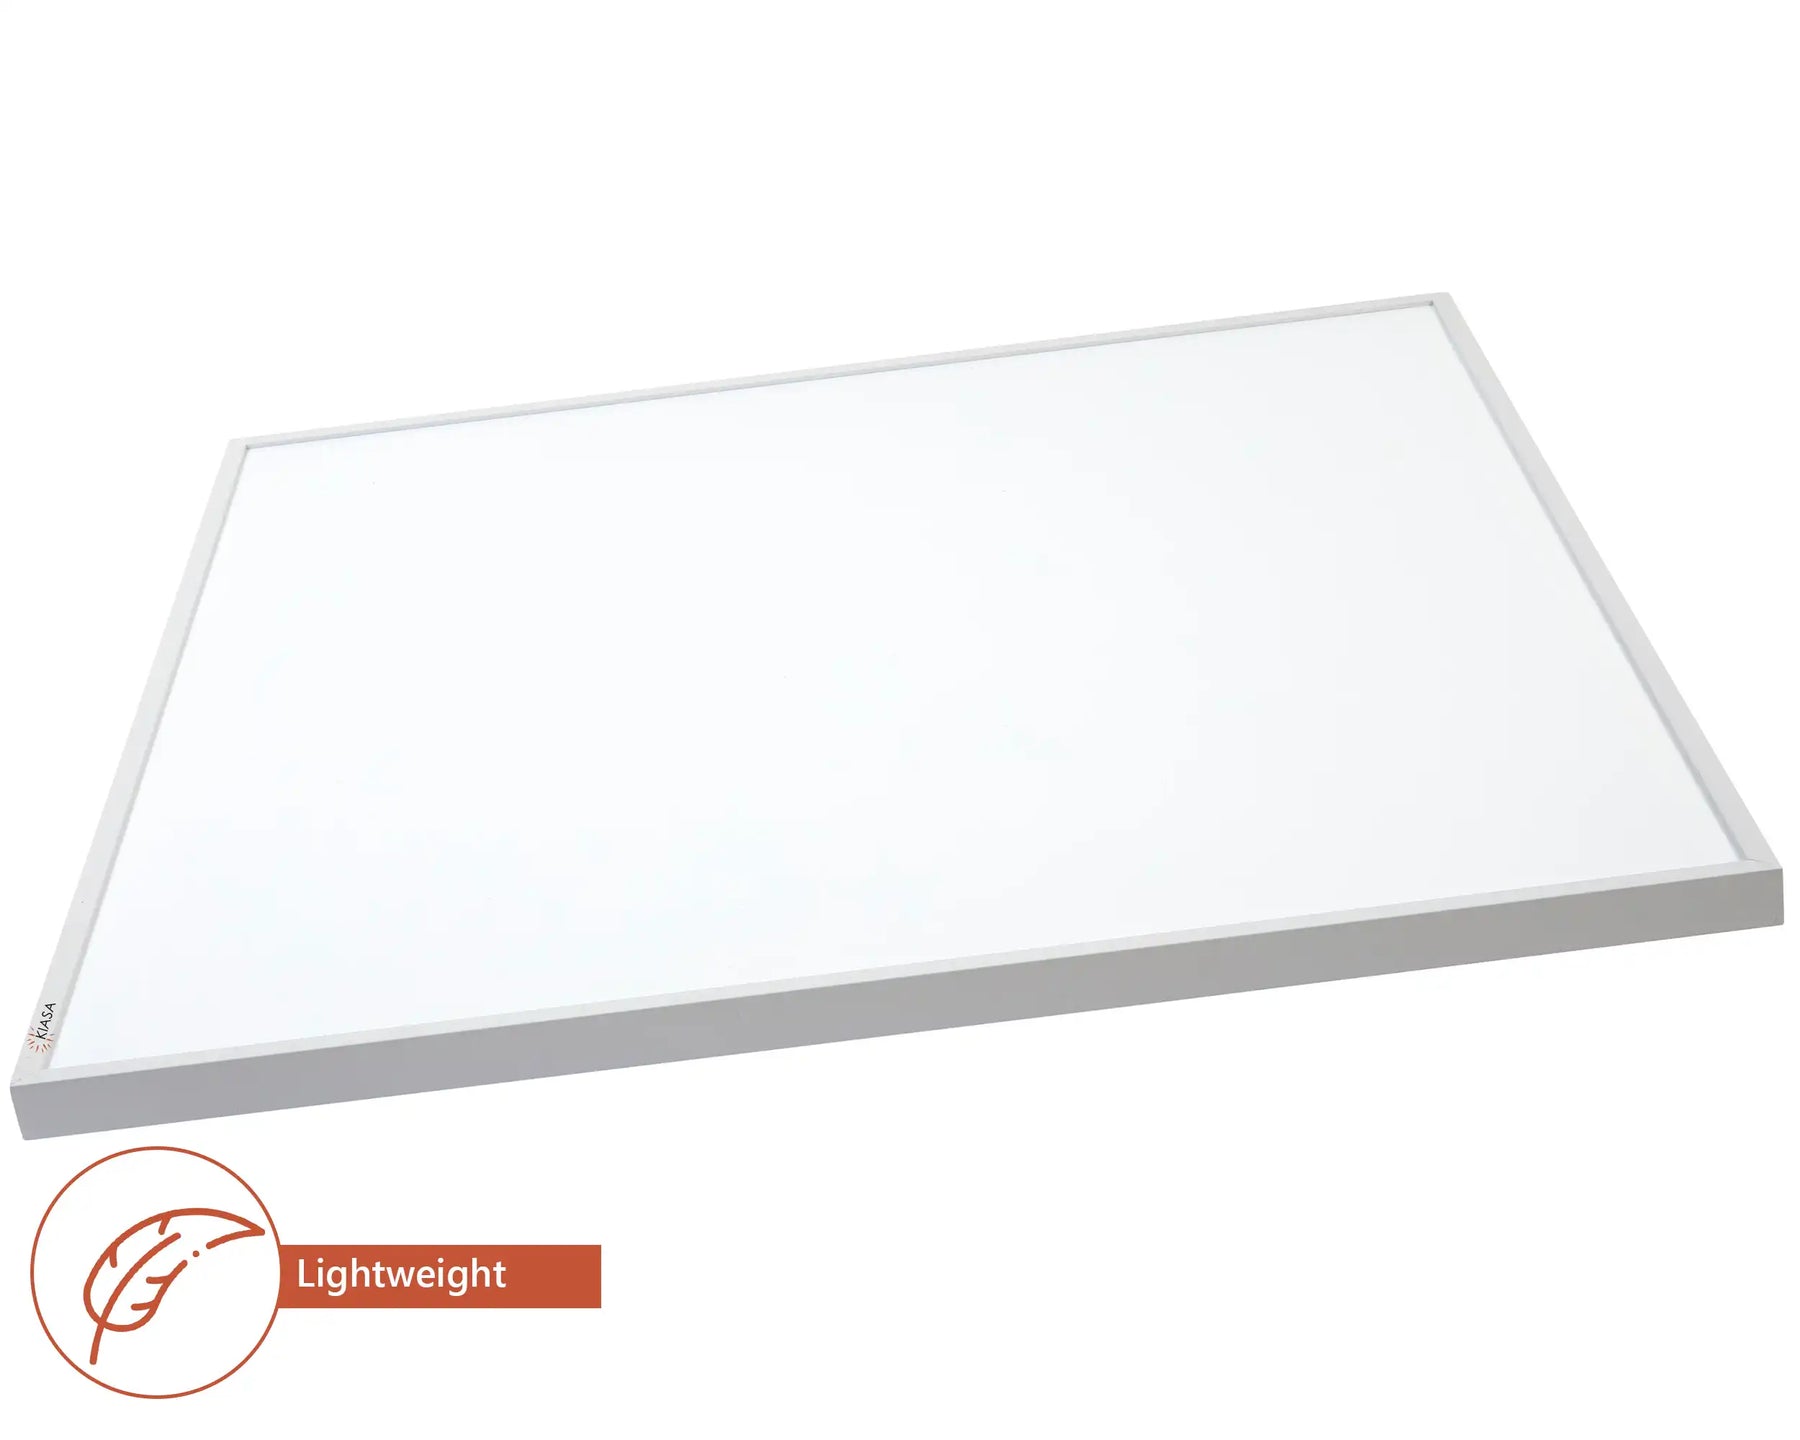 600W Infrared Heating Panel